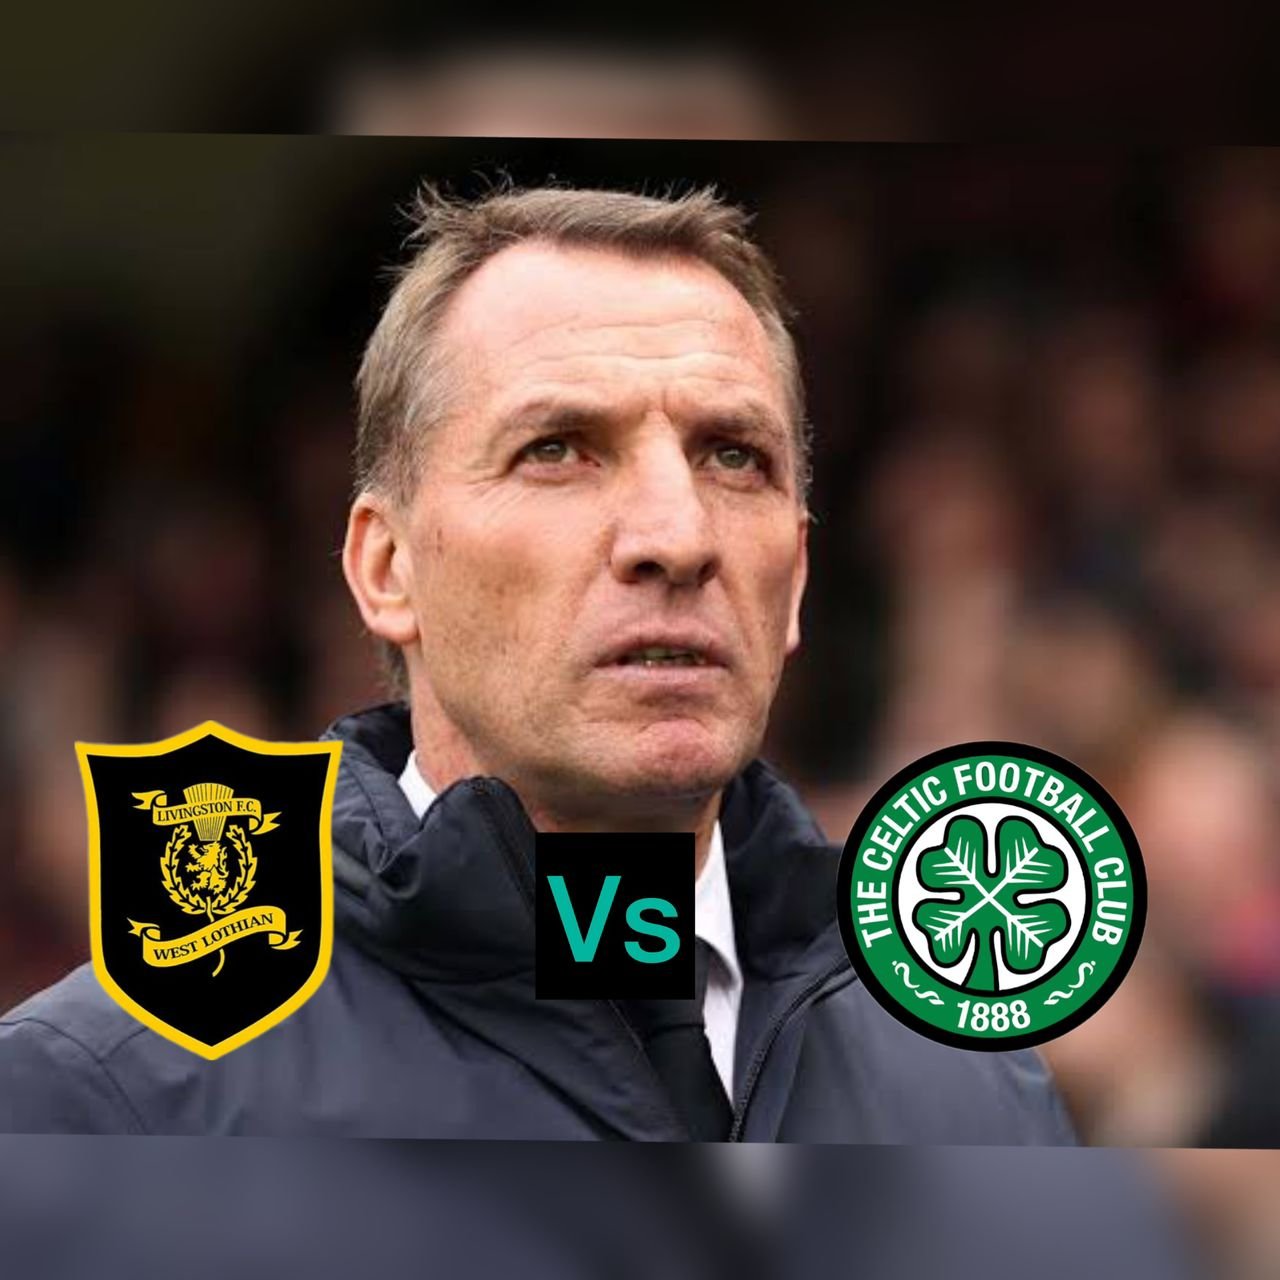 Breaking News: The Scottish Football Association makes a shock move to appoint a referee that Jurgen Klopp has issue with to oversea Livingston vs Celtic Fc match on sunday